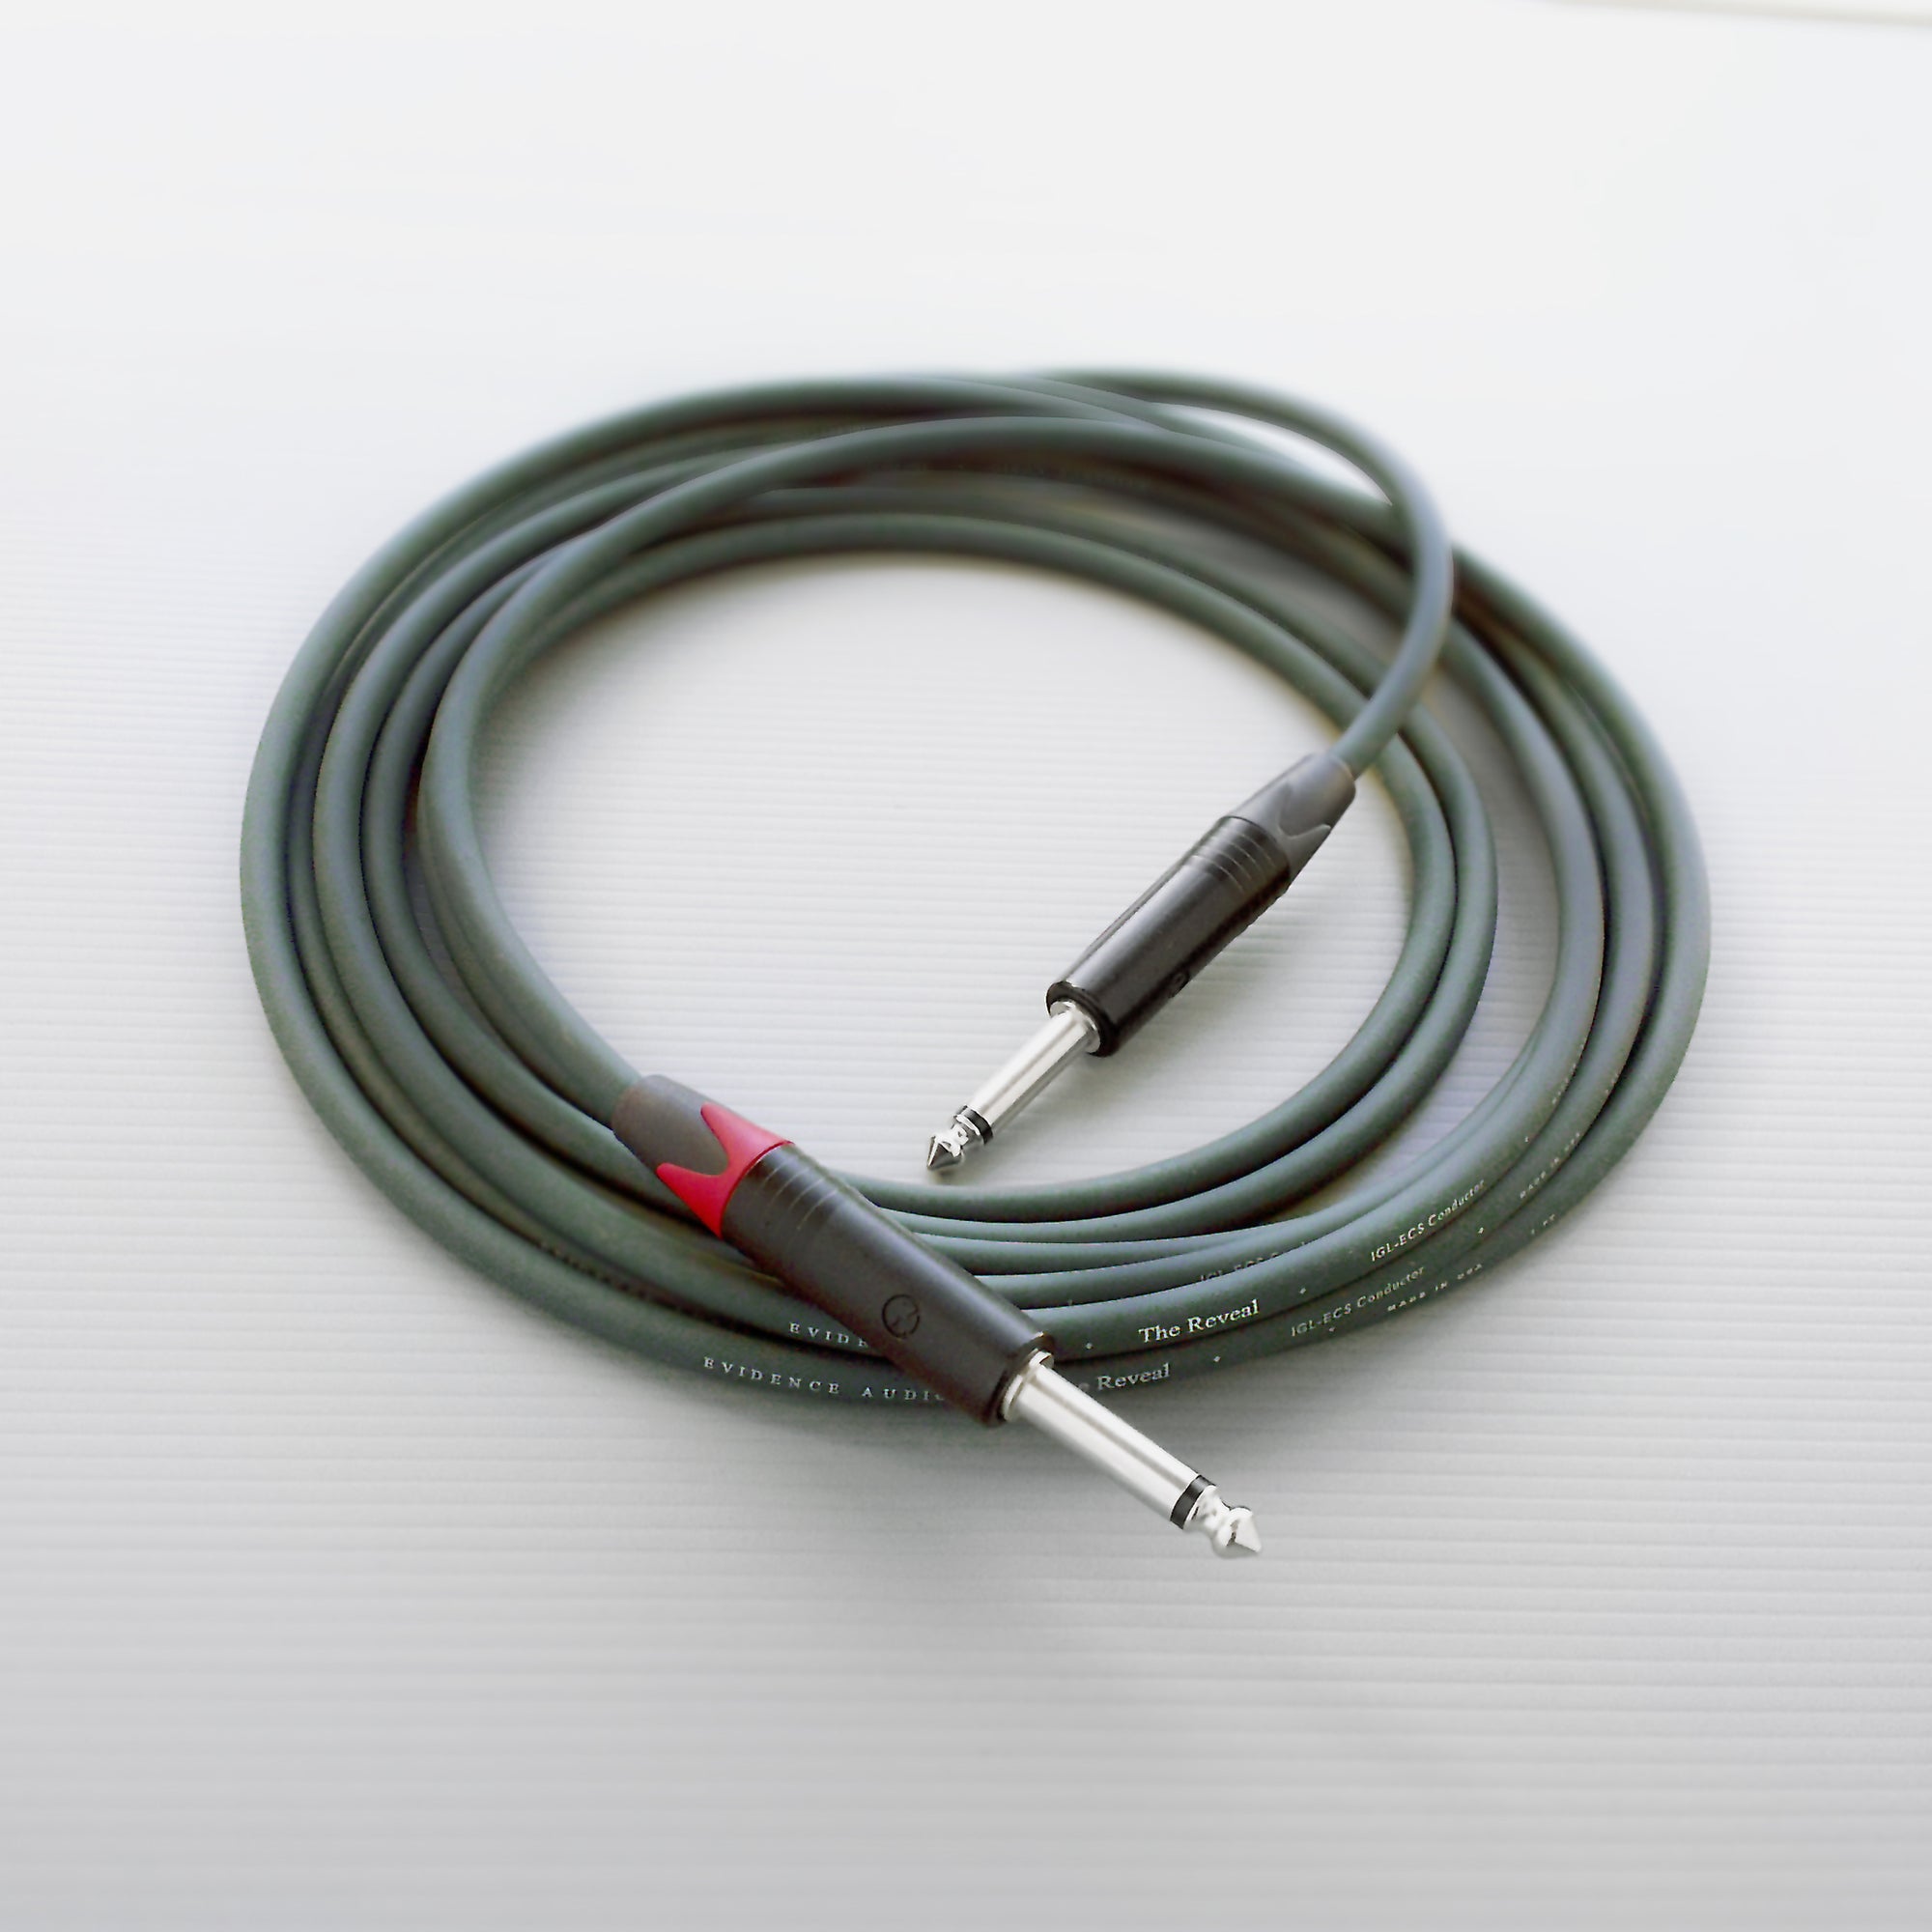 Evidence Audio Reveal Guitar Cable - 20ft: Straight to Straight